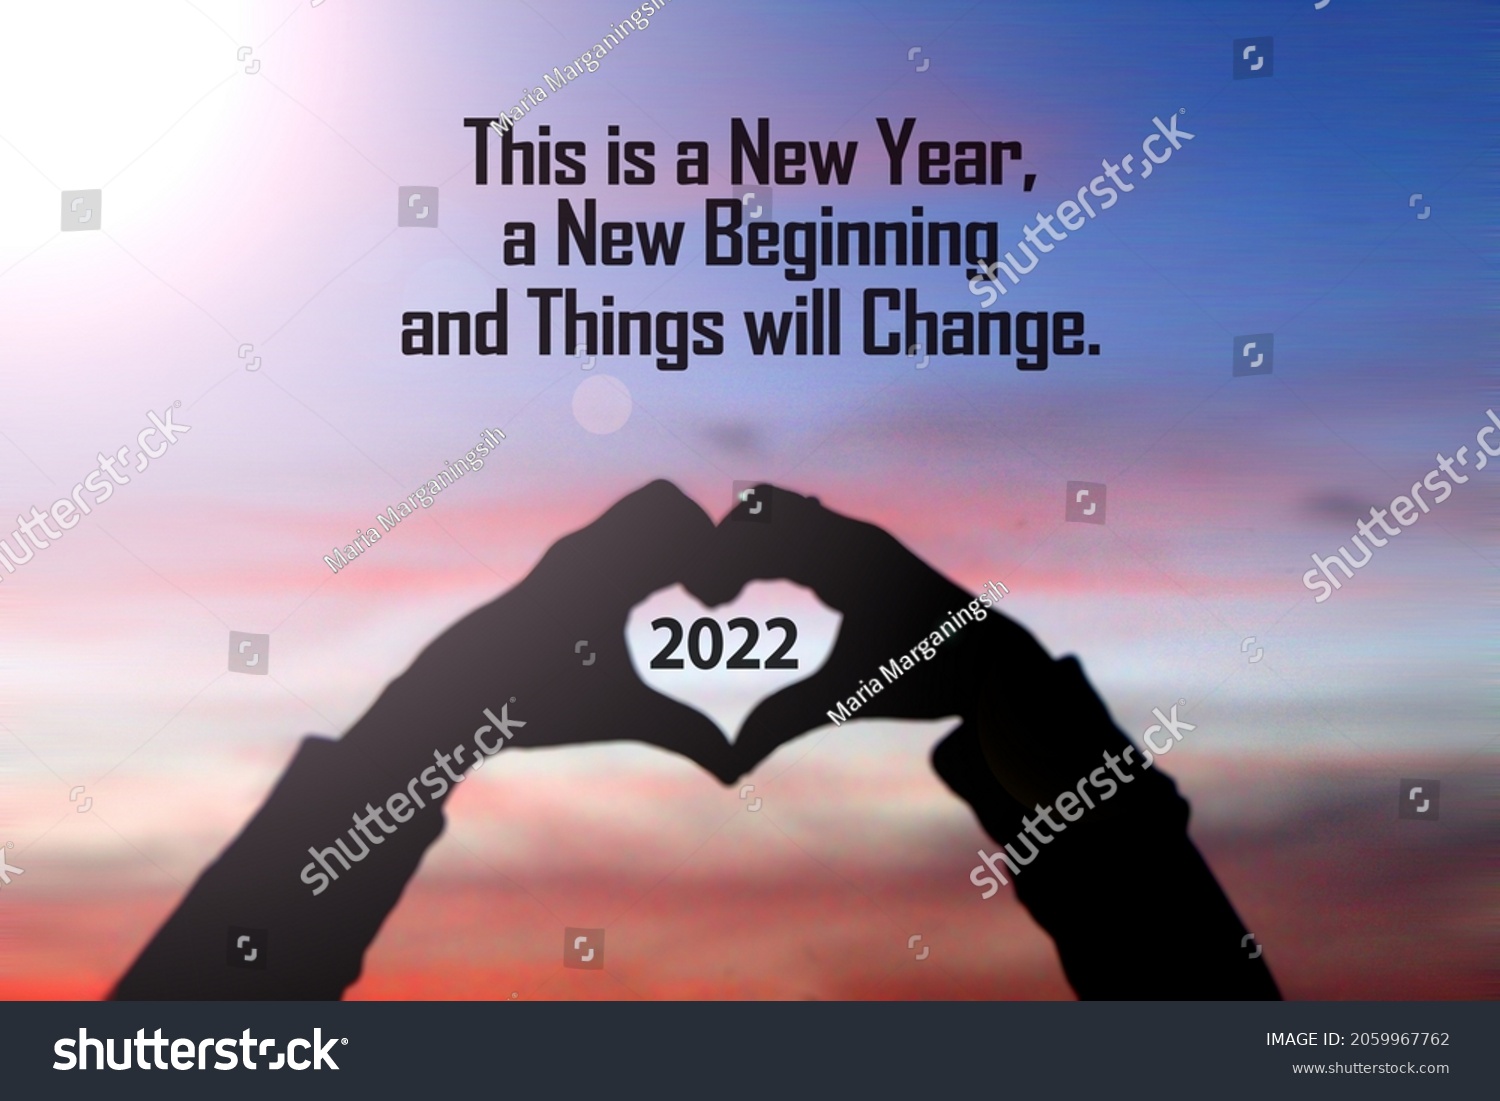 New year inspirational motivational quote - This is a new year a beginning, things will change. Silhouette of a person holding a heart shaped hands with 2022 number inside. On sunset sky background. #2059967762